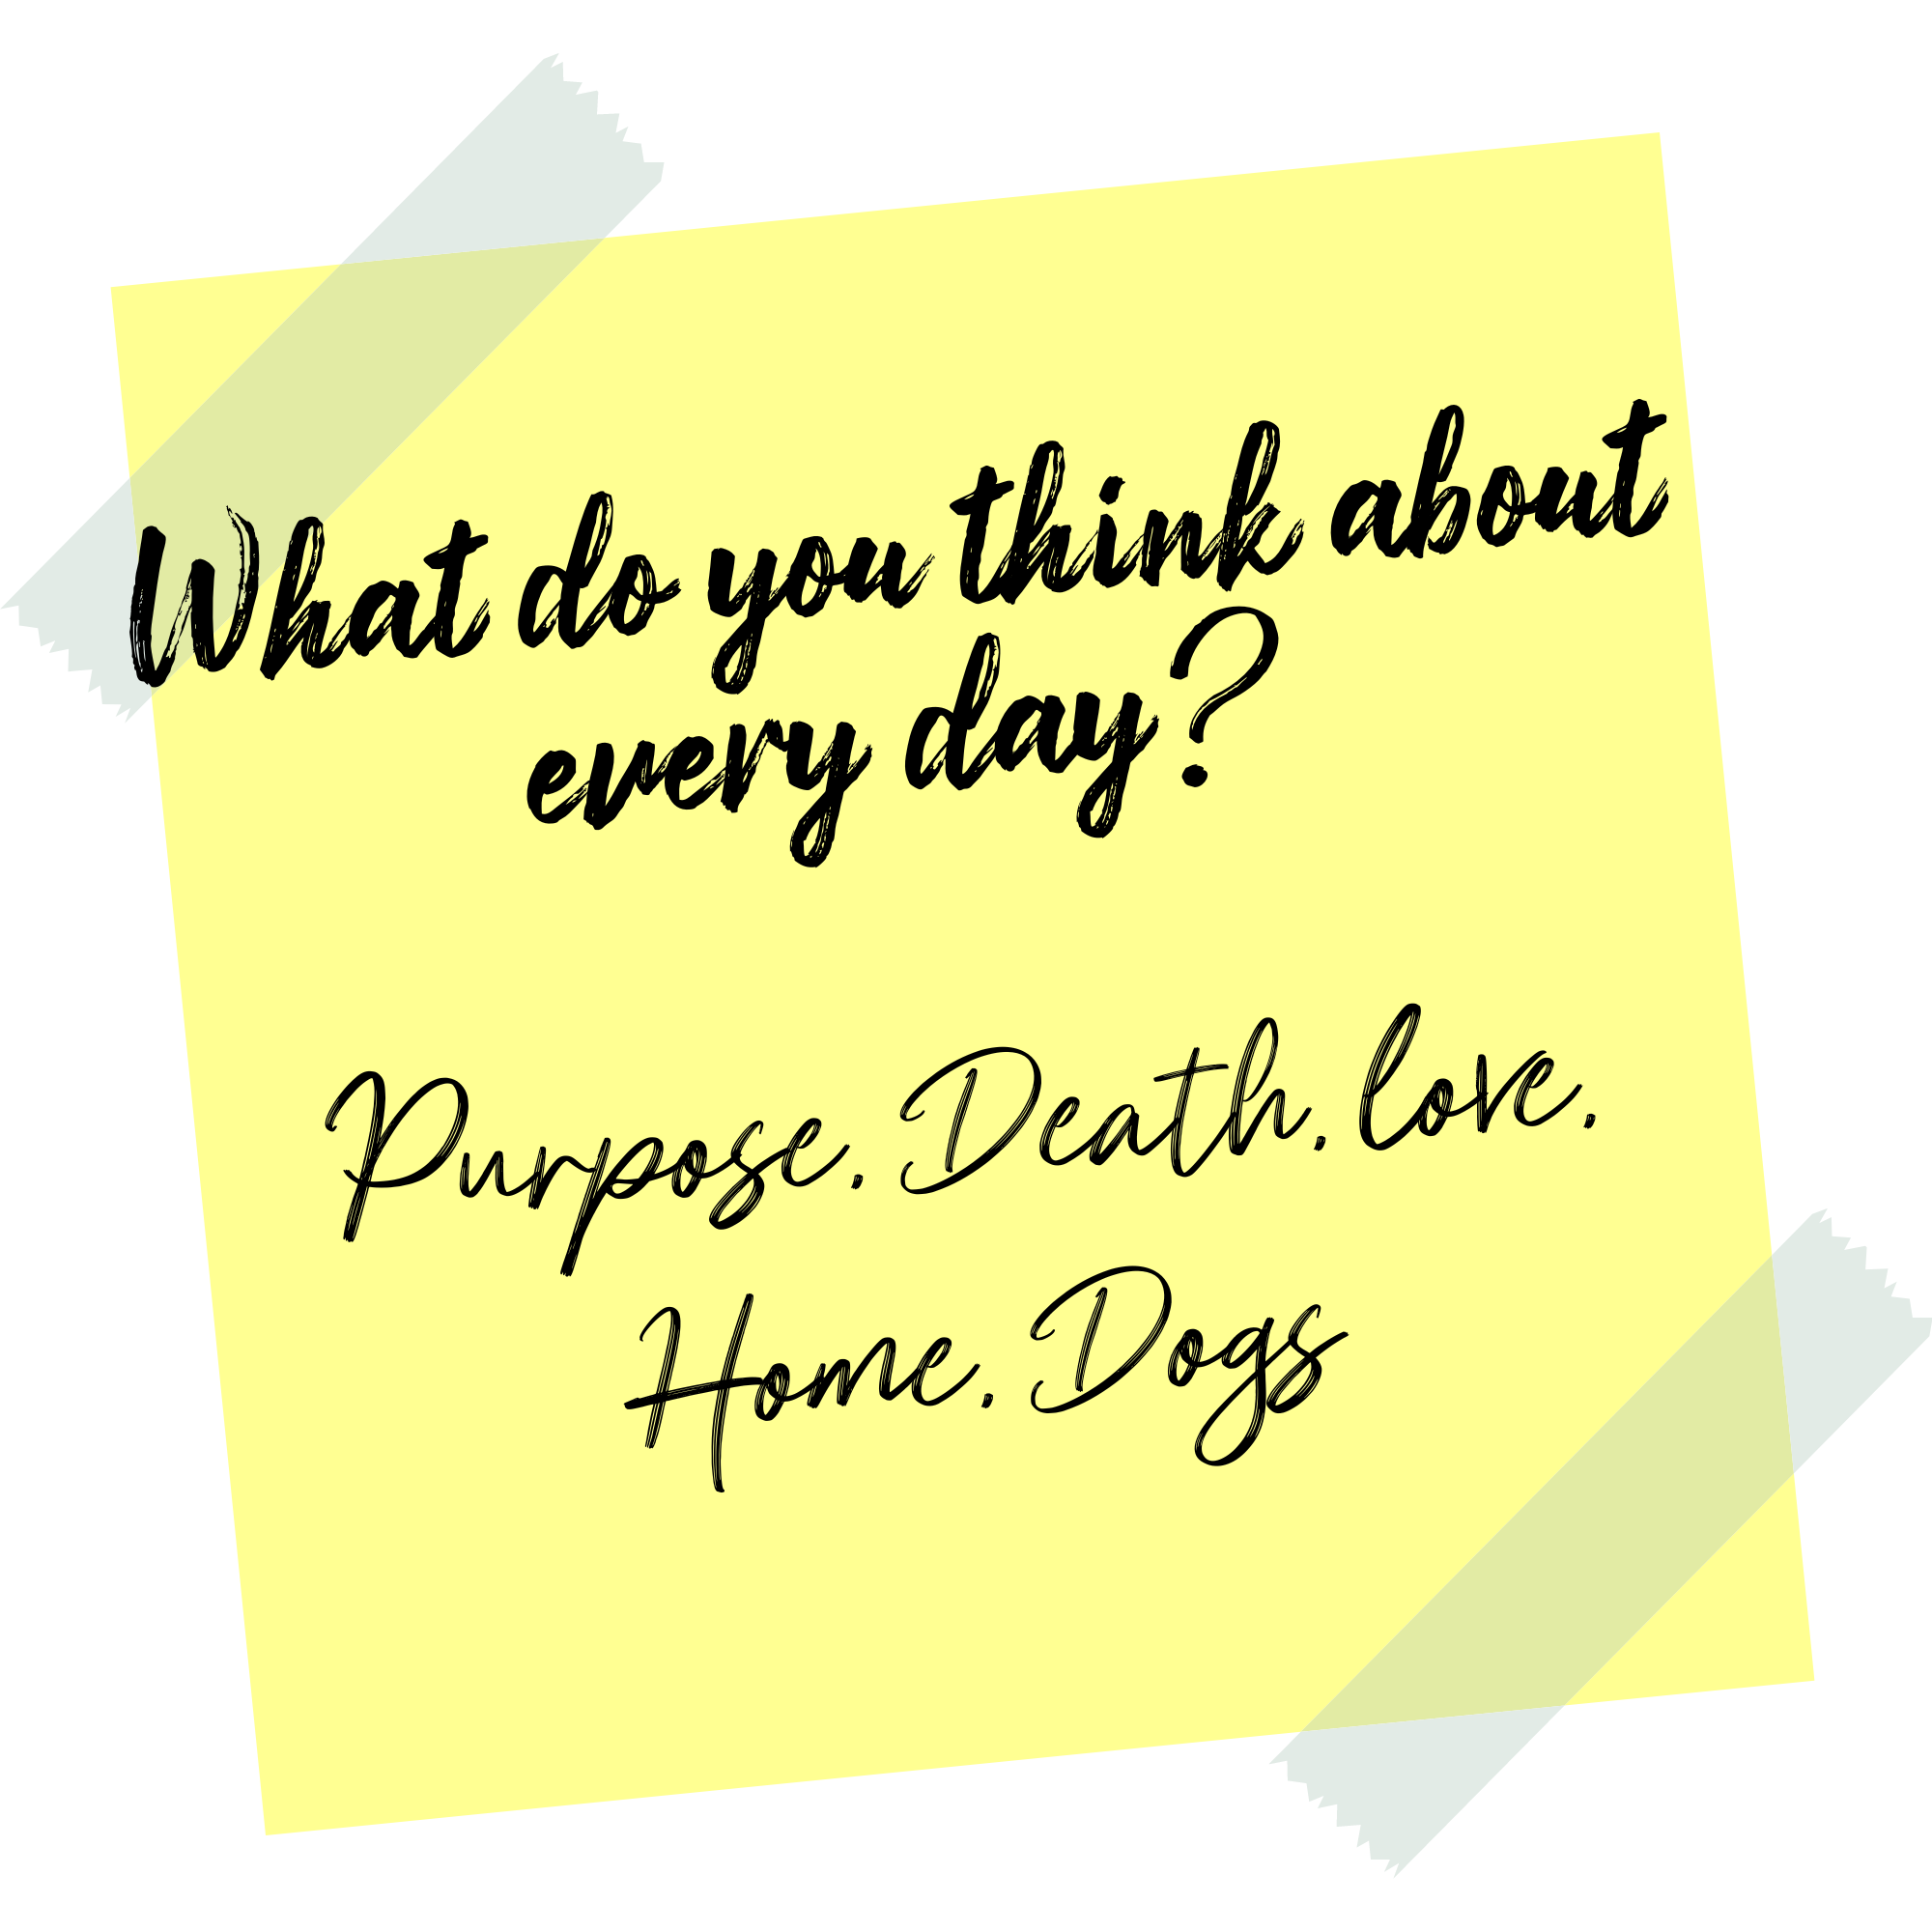 What do you think about every day? Purpose, death, love, home, dogs